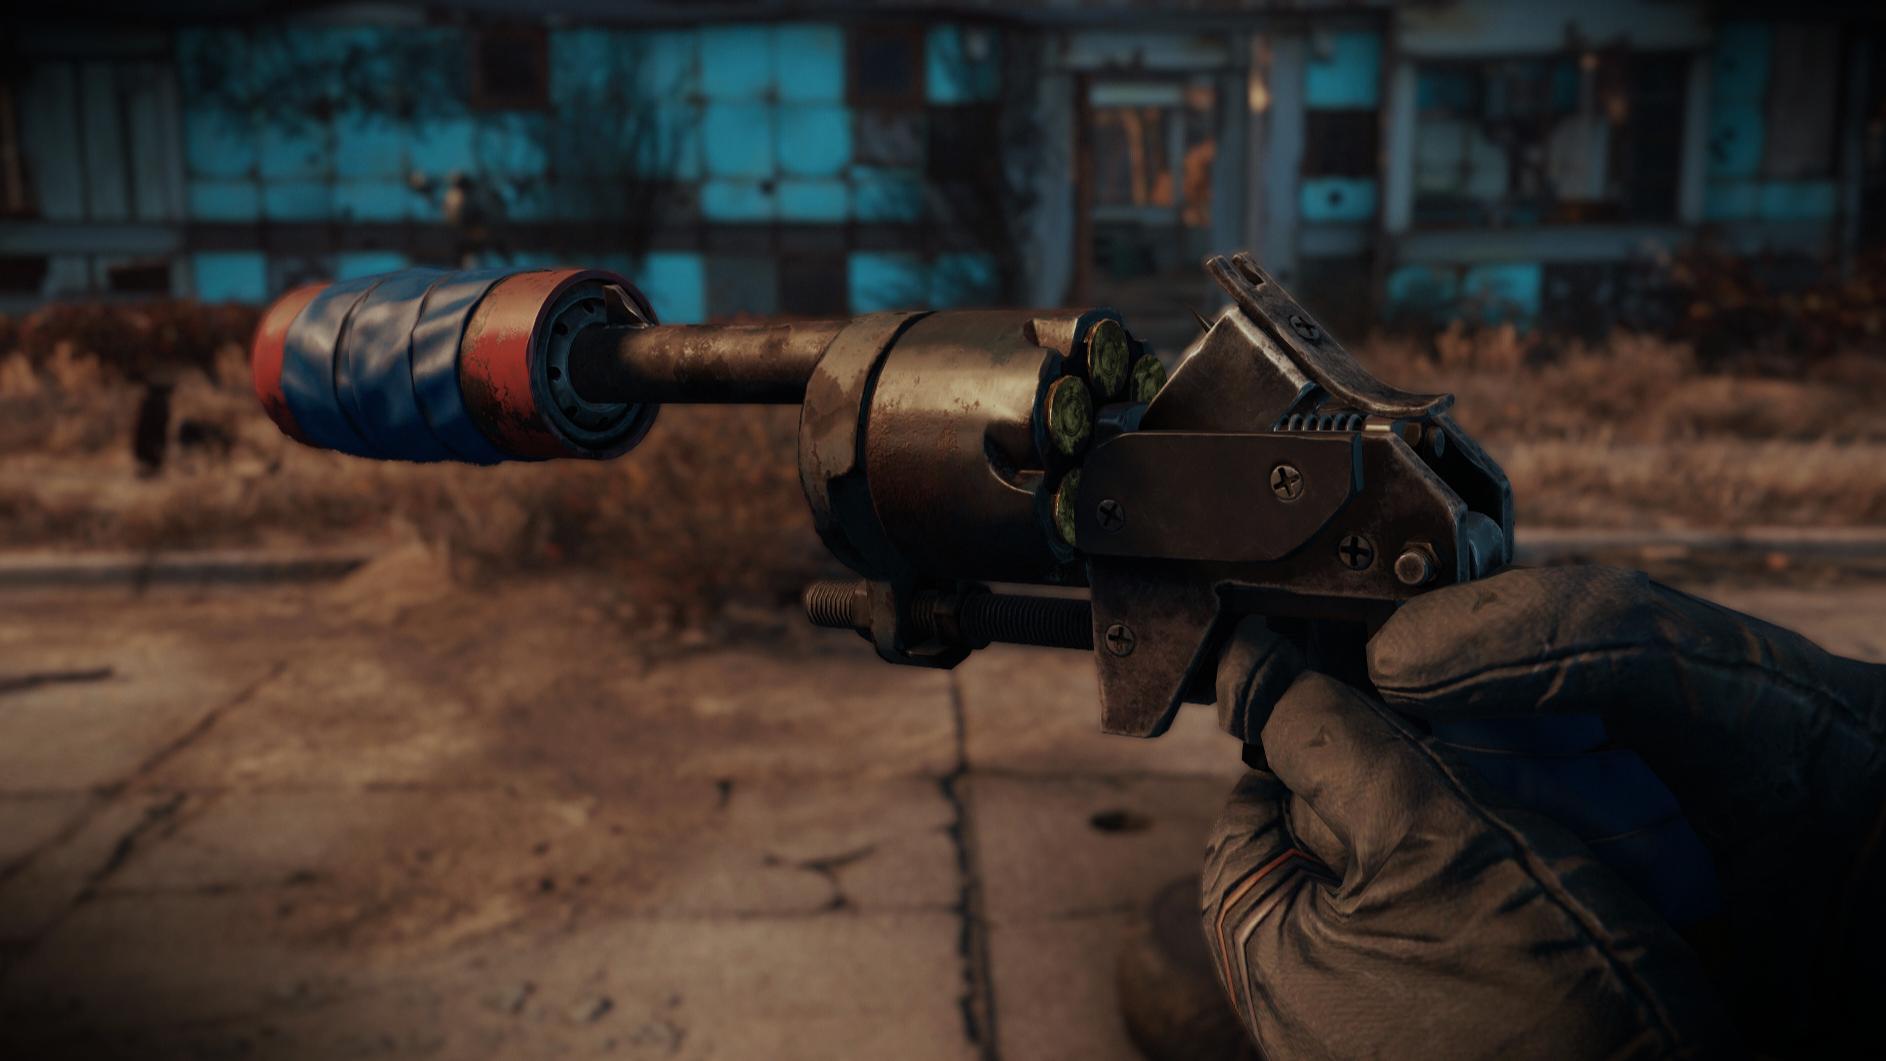 Strong weapon fallout 4 фото 49